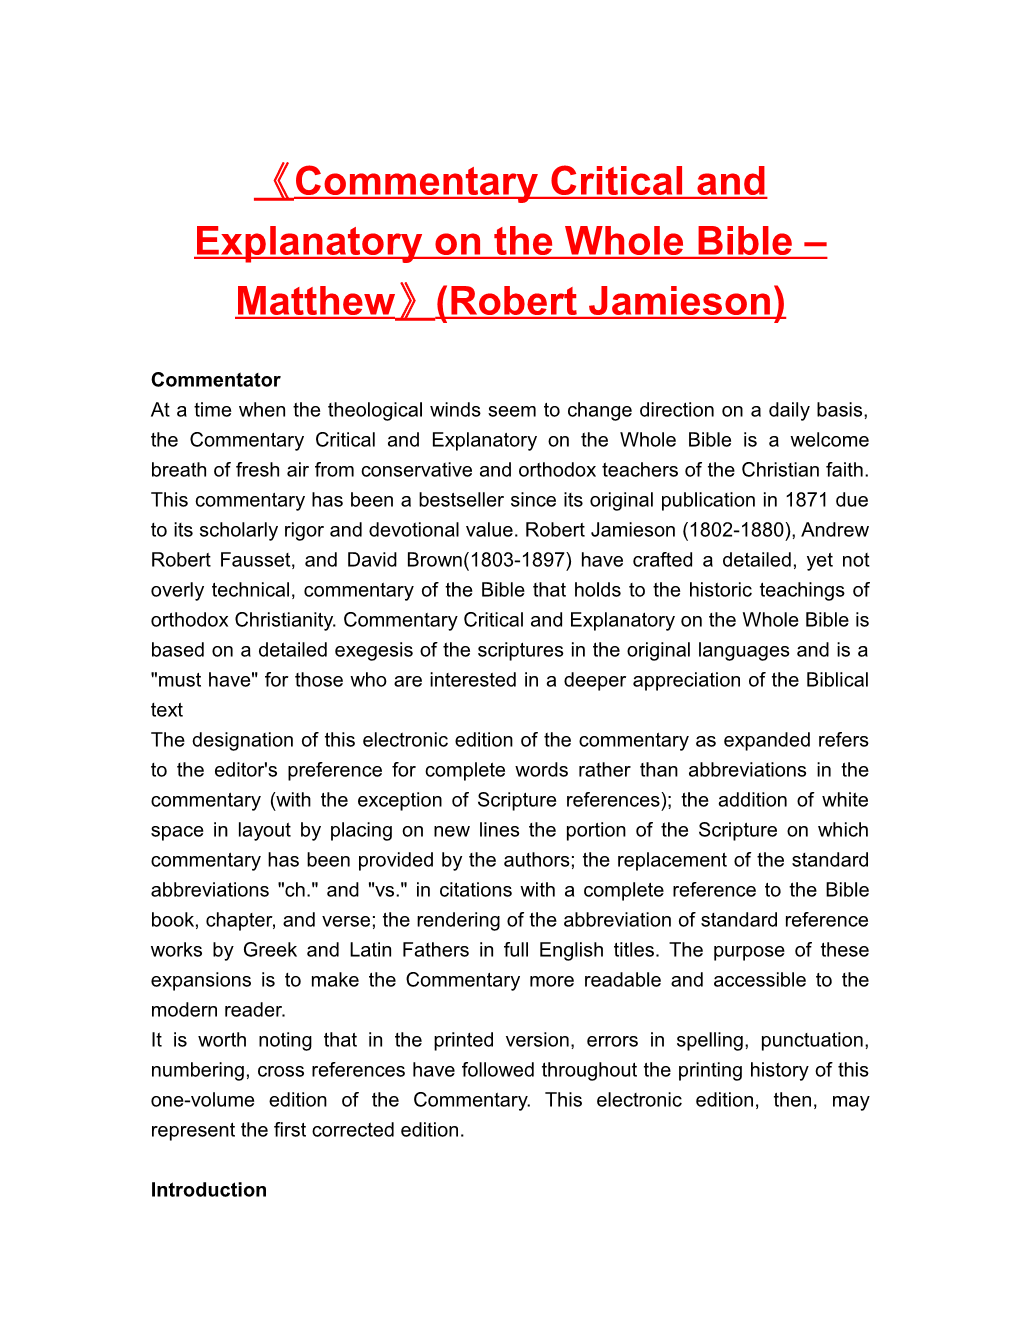 Commentary Critical and Explanatory on the Whole Bible Matthew (Robert Jamieson)